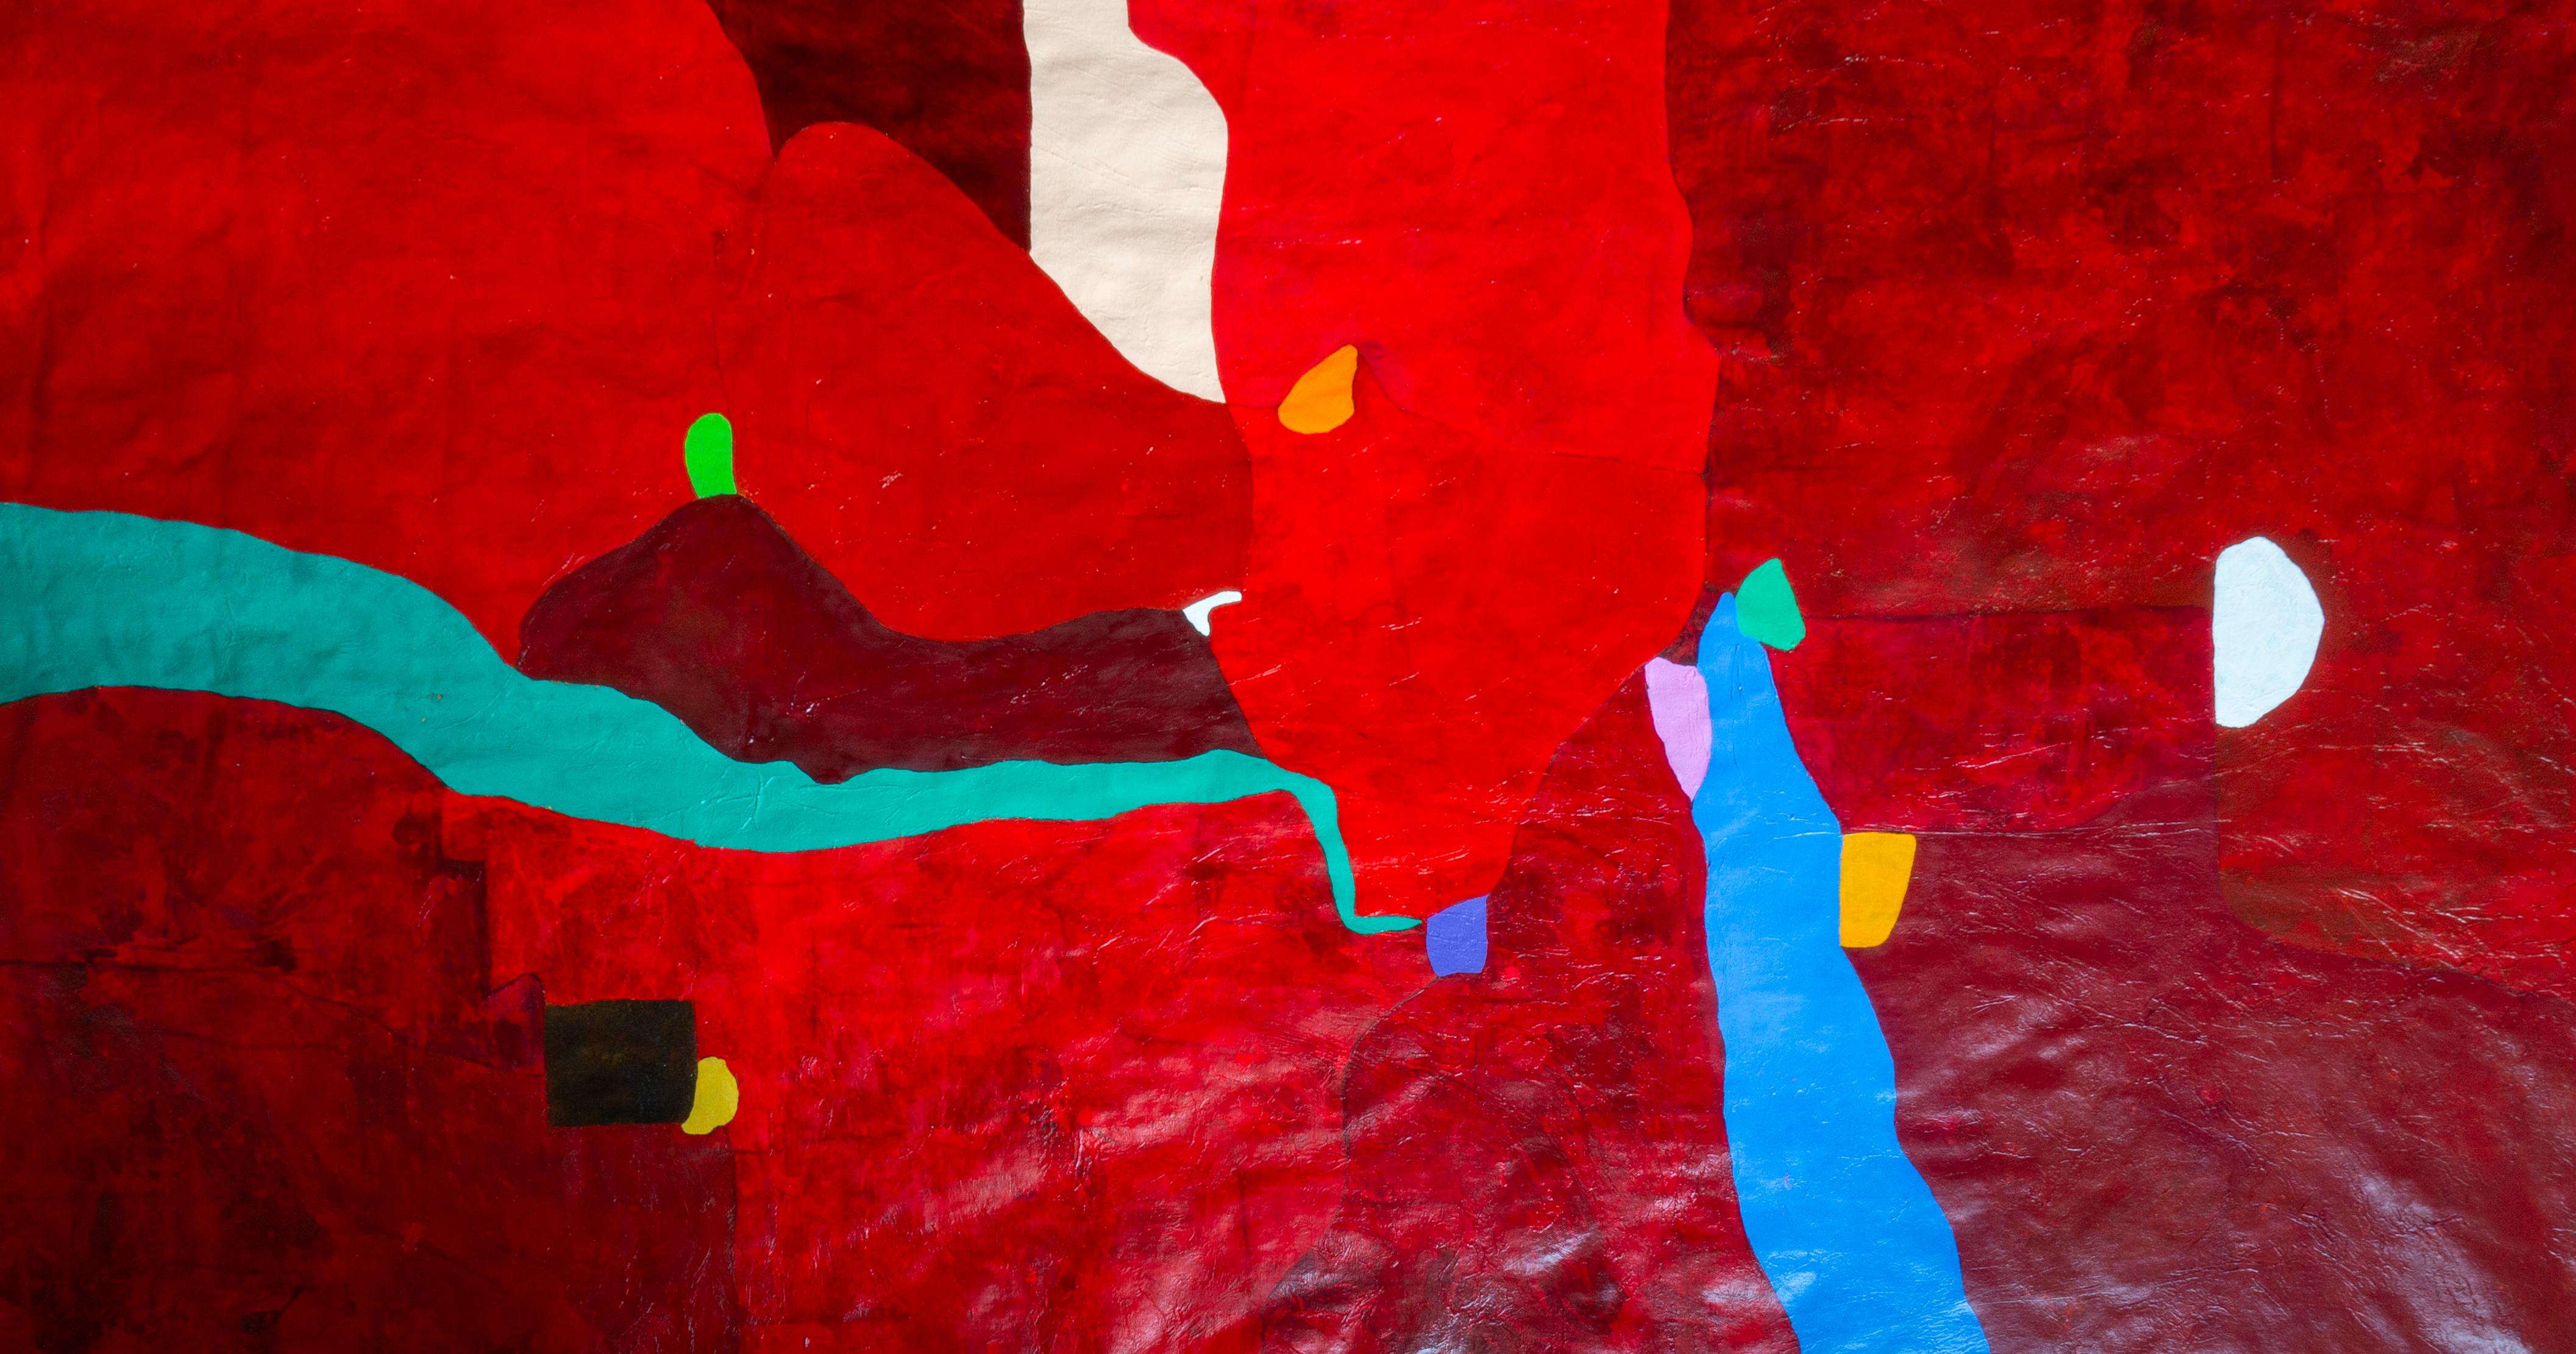 Luis Alexander Rodríguez (Ie-Xiua) Interior Painting - Red Abstract Composition by L-Xiua: Exploration of Color and Form